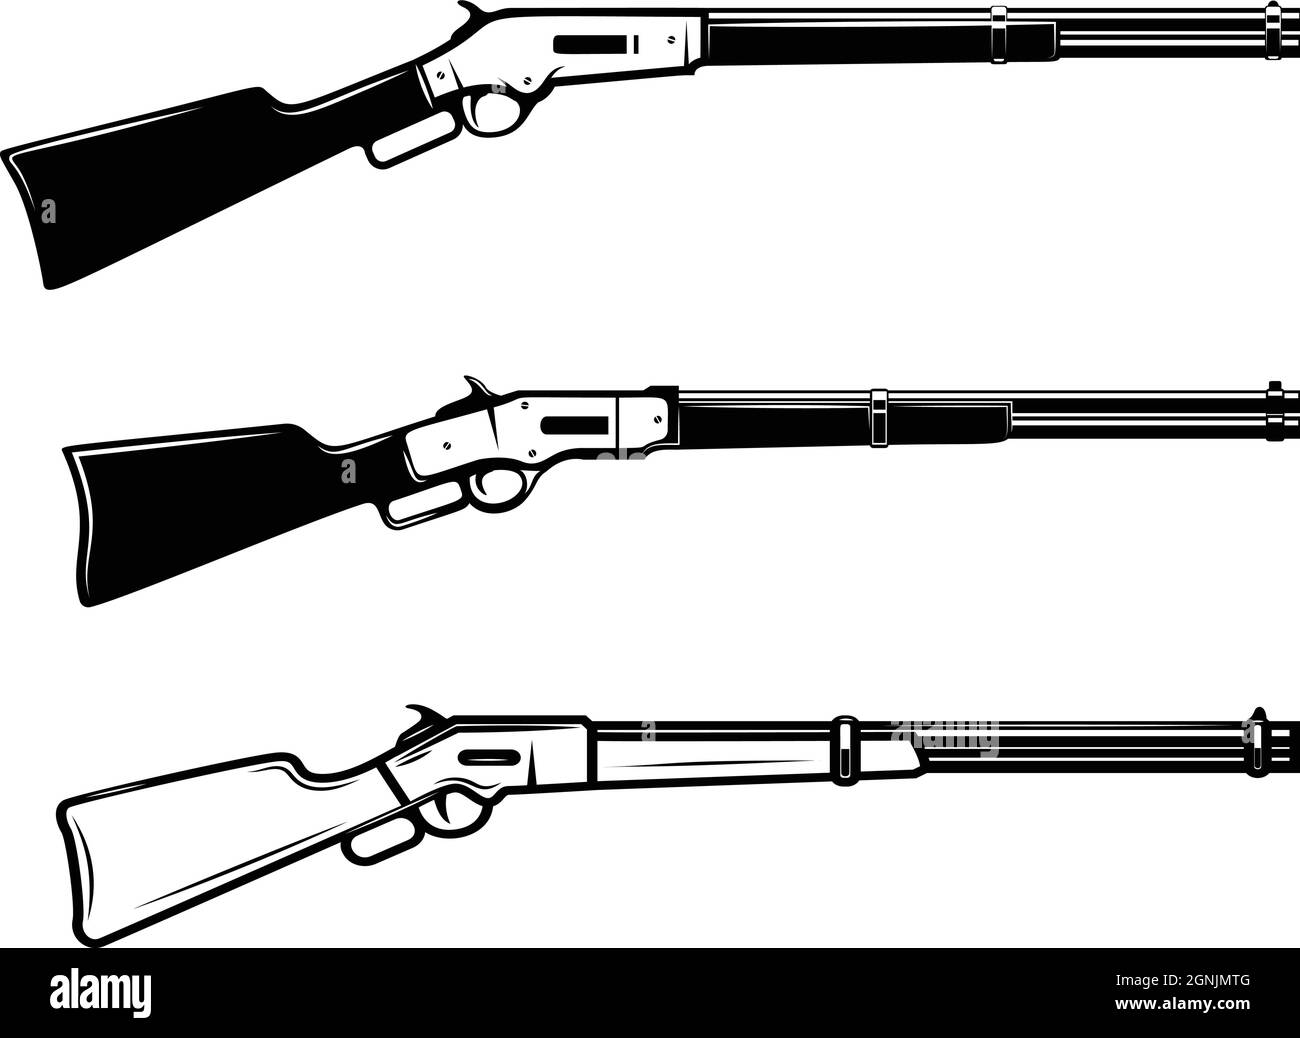 Illustration of winchester rifle in monochrome style. Design element for logo, label, sign, poster. Vector illustration Stock Vector